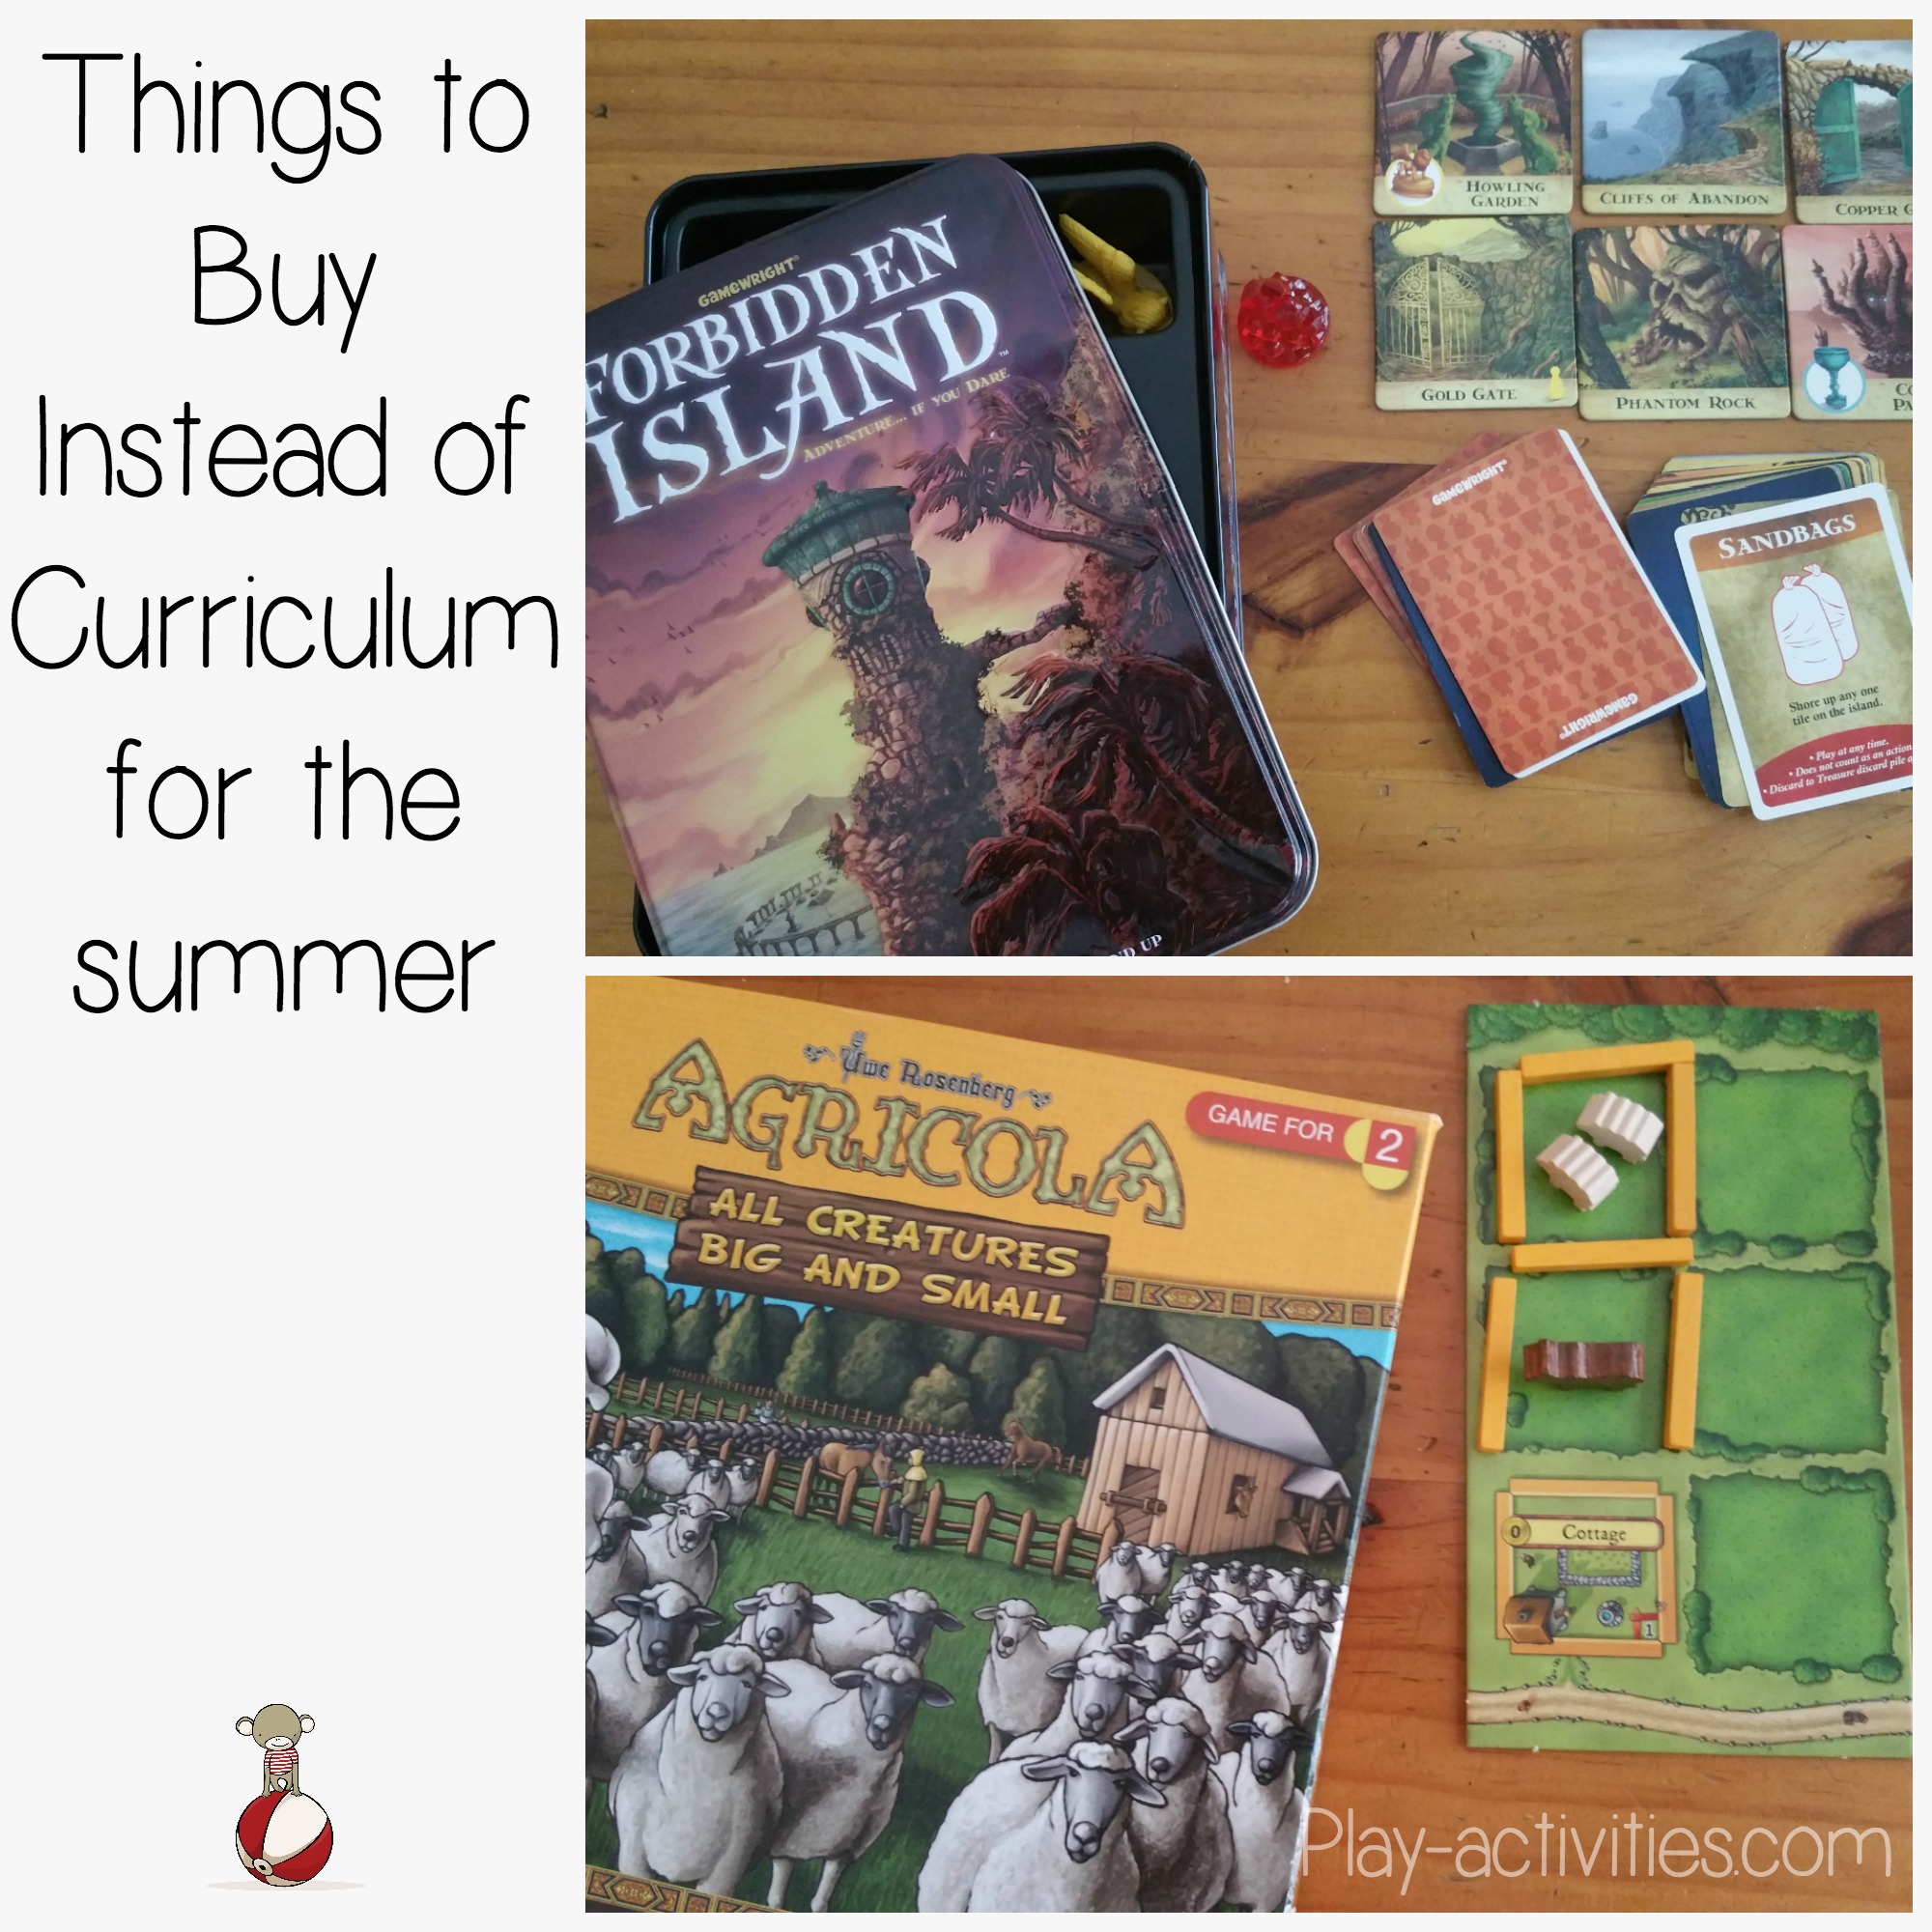 Things to Buy Instead of Curriculum for the summer | Agricola + Forbidden island 